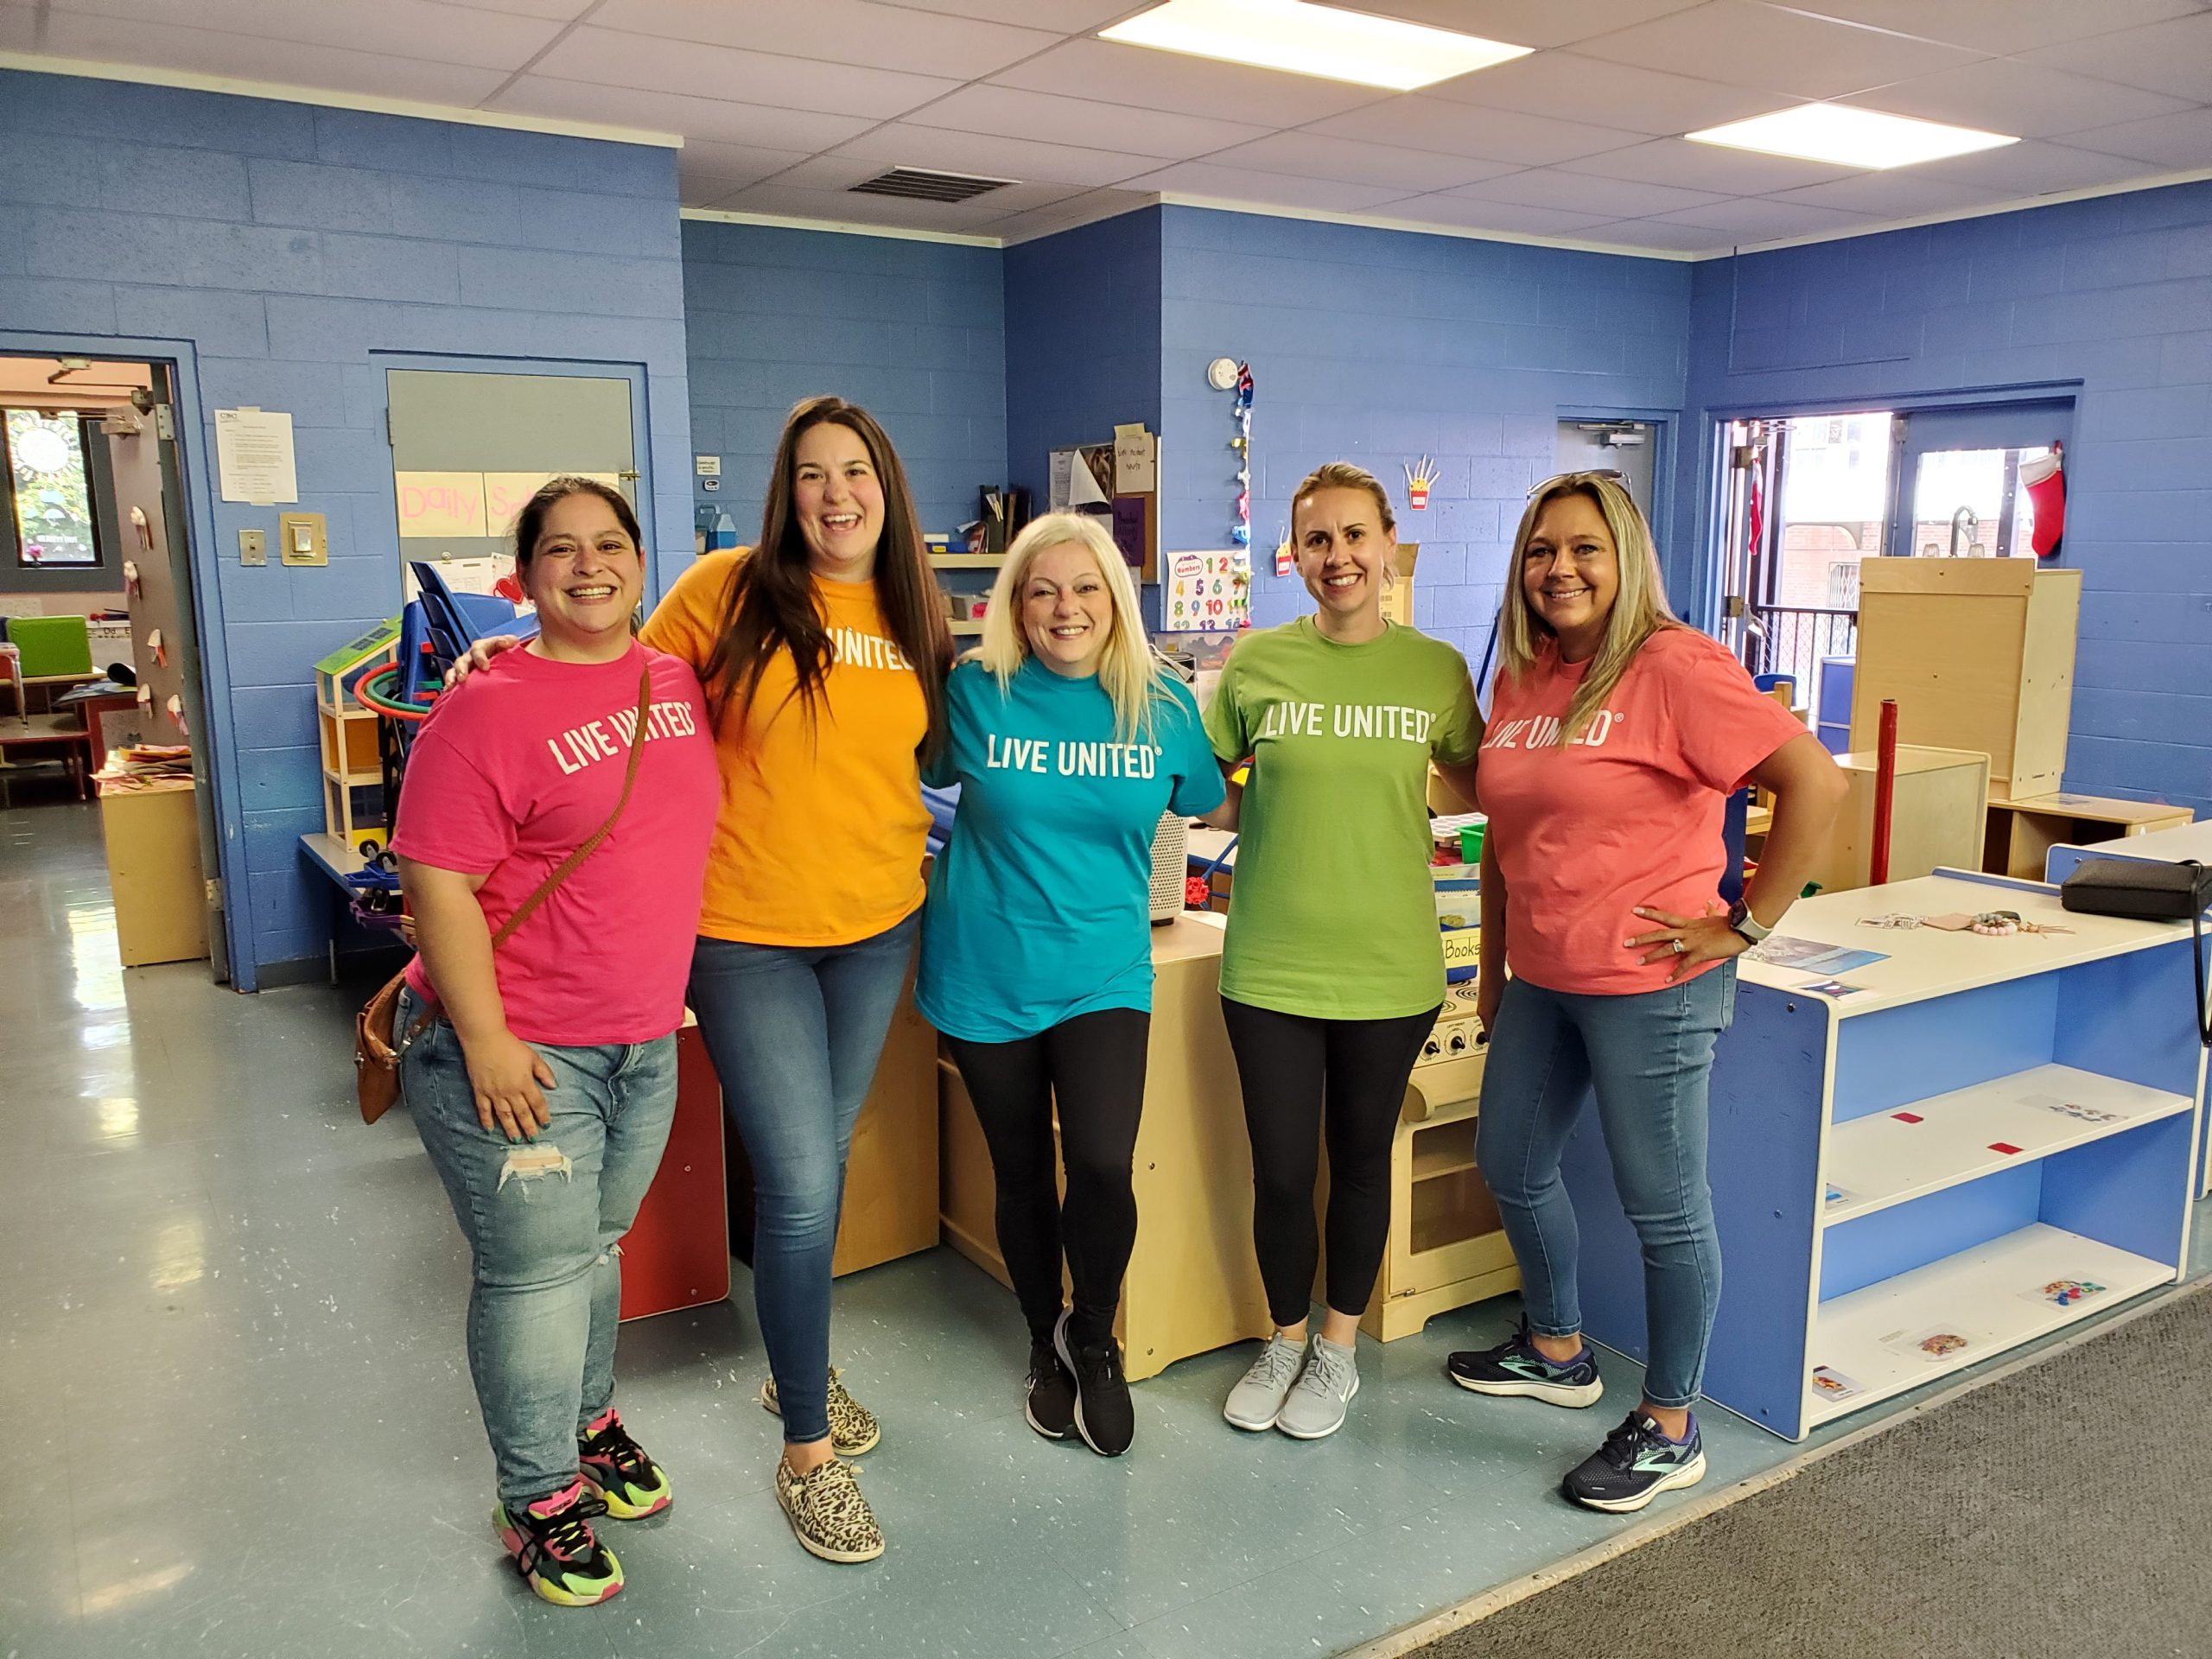 UGI employees pose in the Child Development Council Day Care.